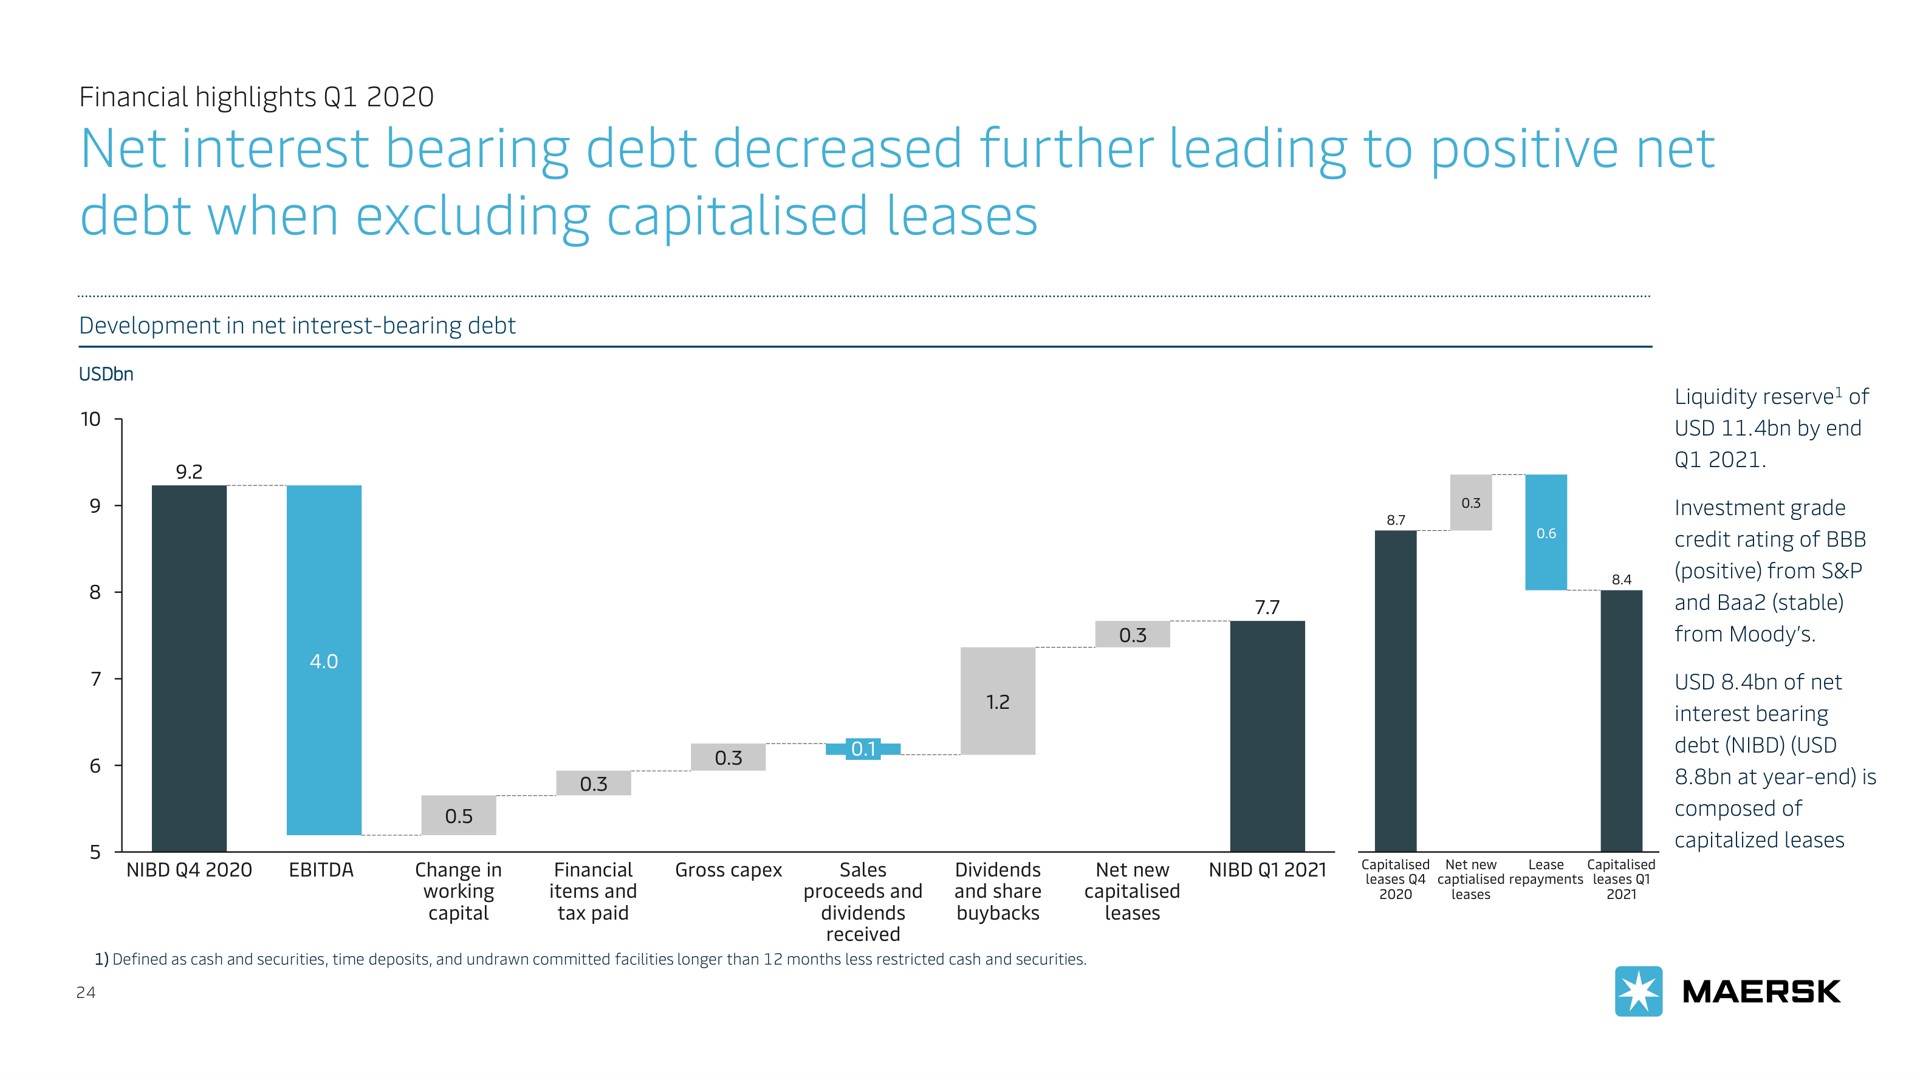 net interest bearing debt decreased further leading to positive net debt when excluding leases | Maersk